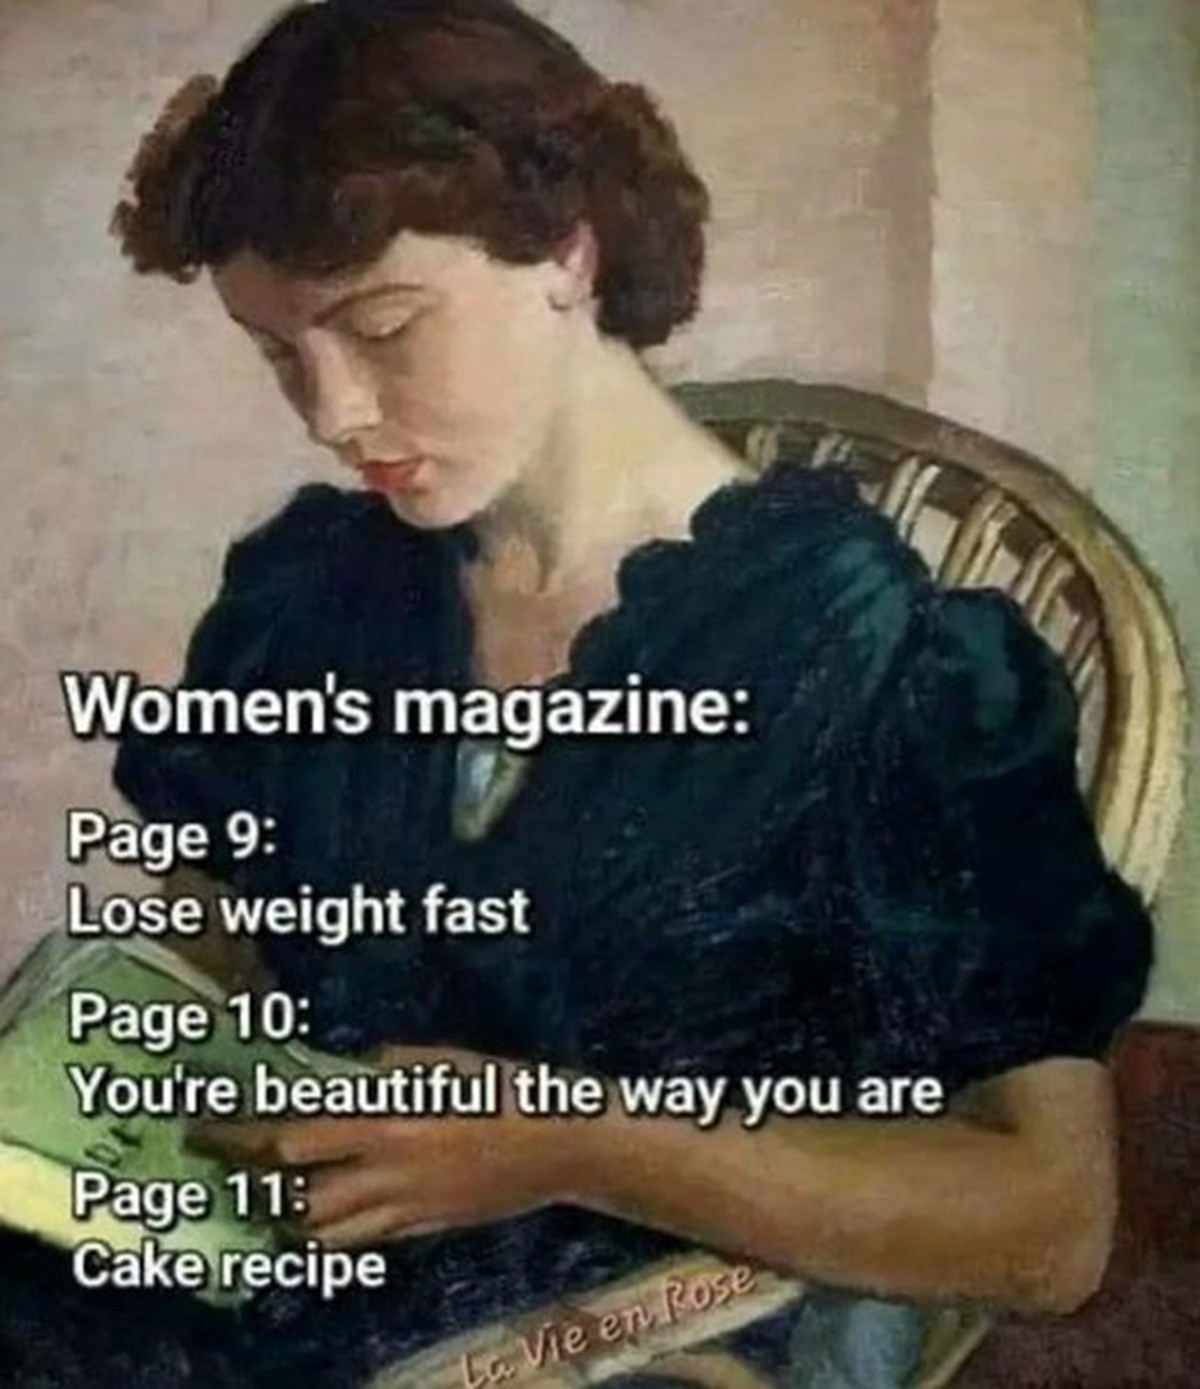 vera alabaster girl reading - Women's magazine Page 9 Lose weight fast Page 10 You're beautiful the way you are Page 11 Cake recipe La Vie en Rose